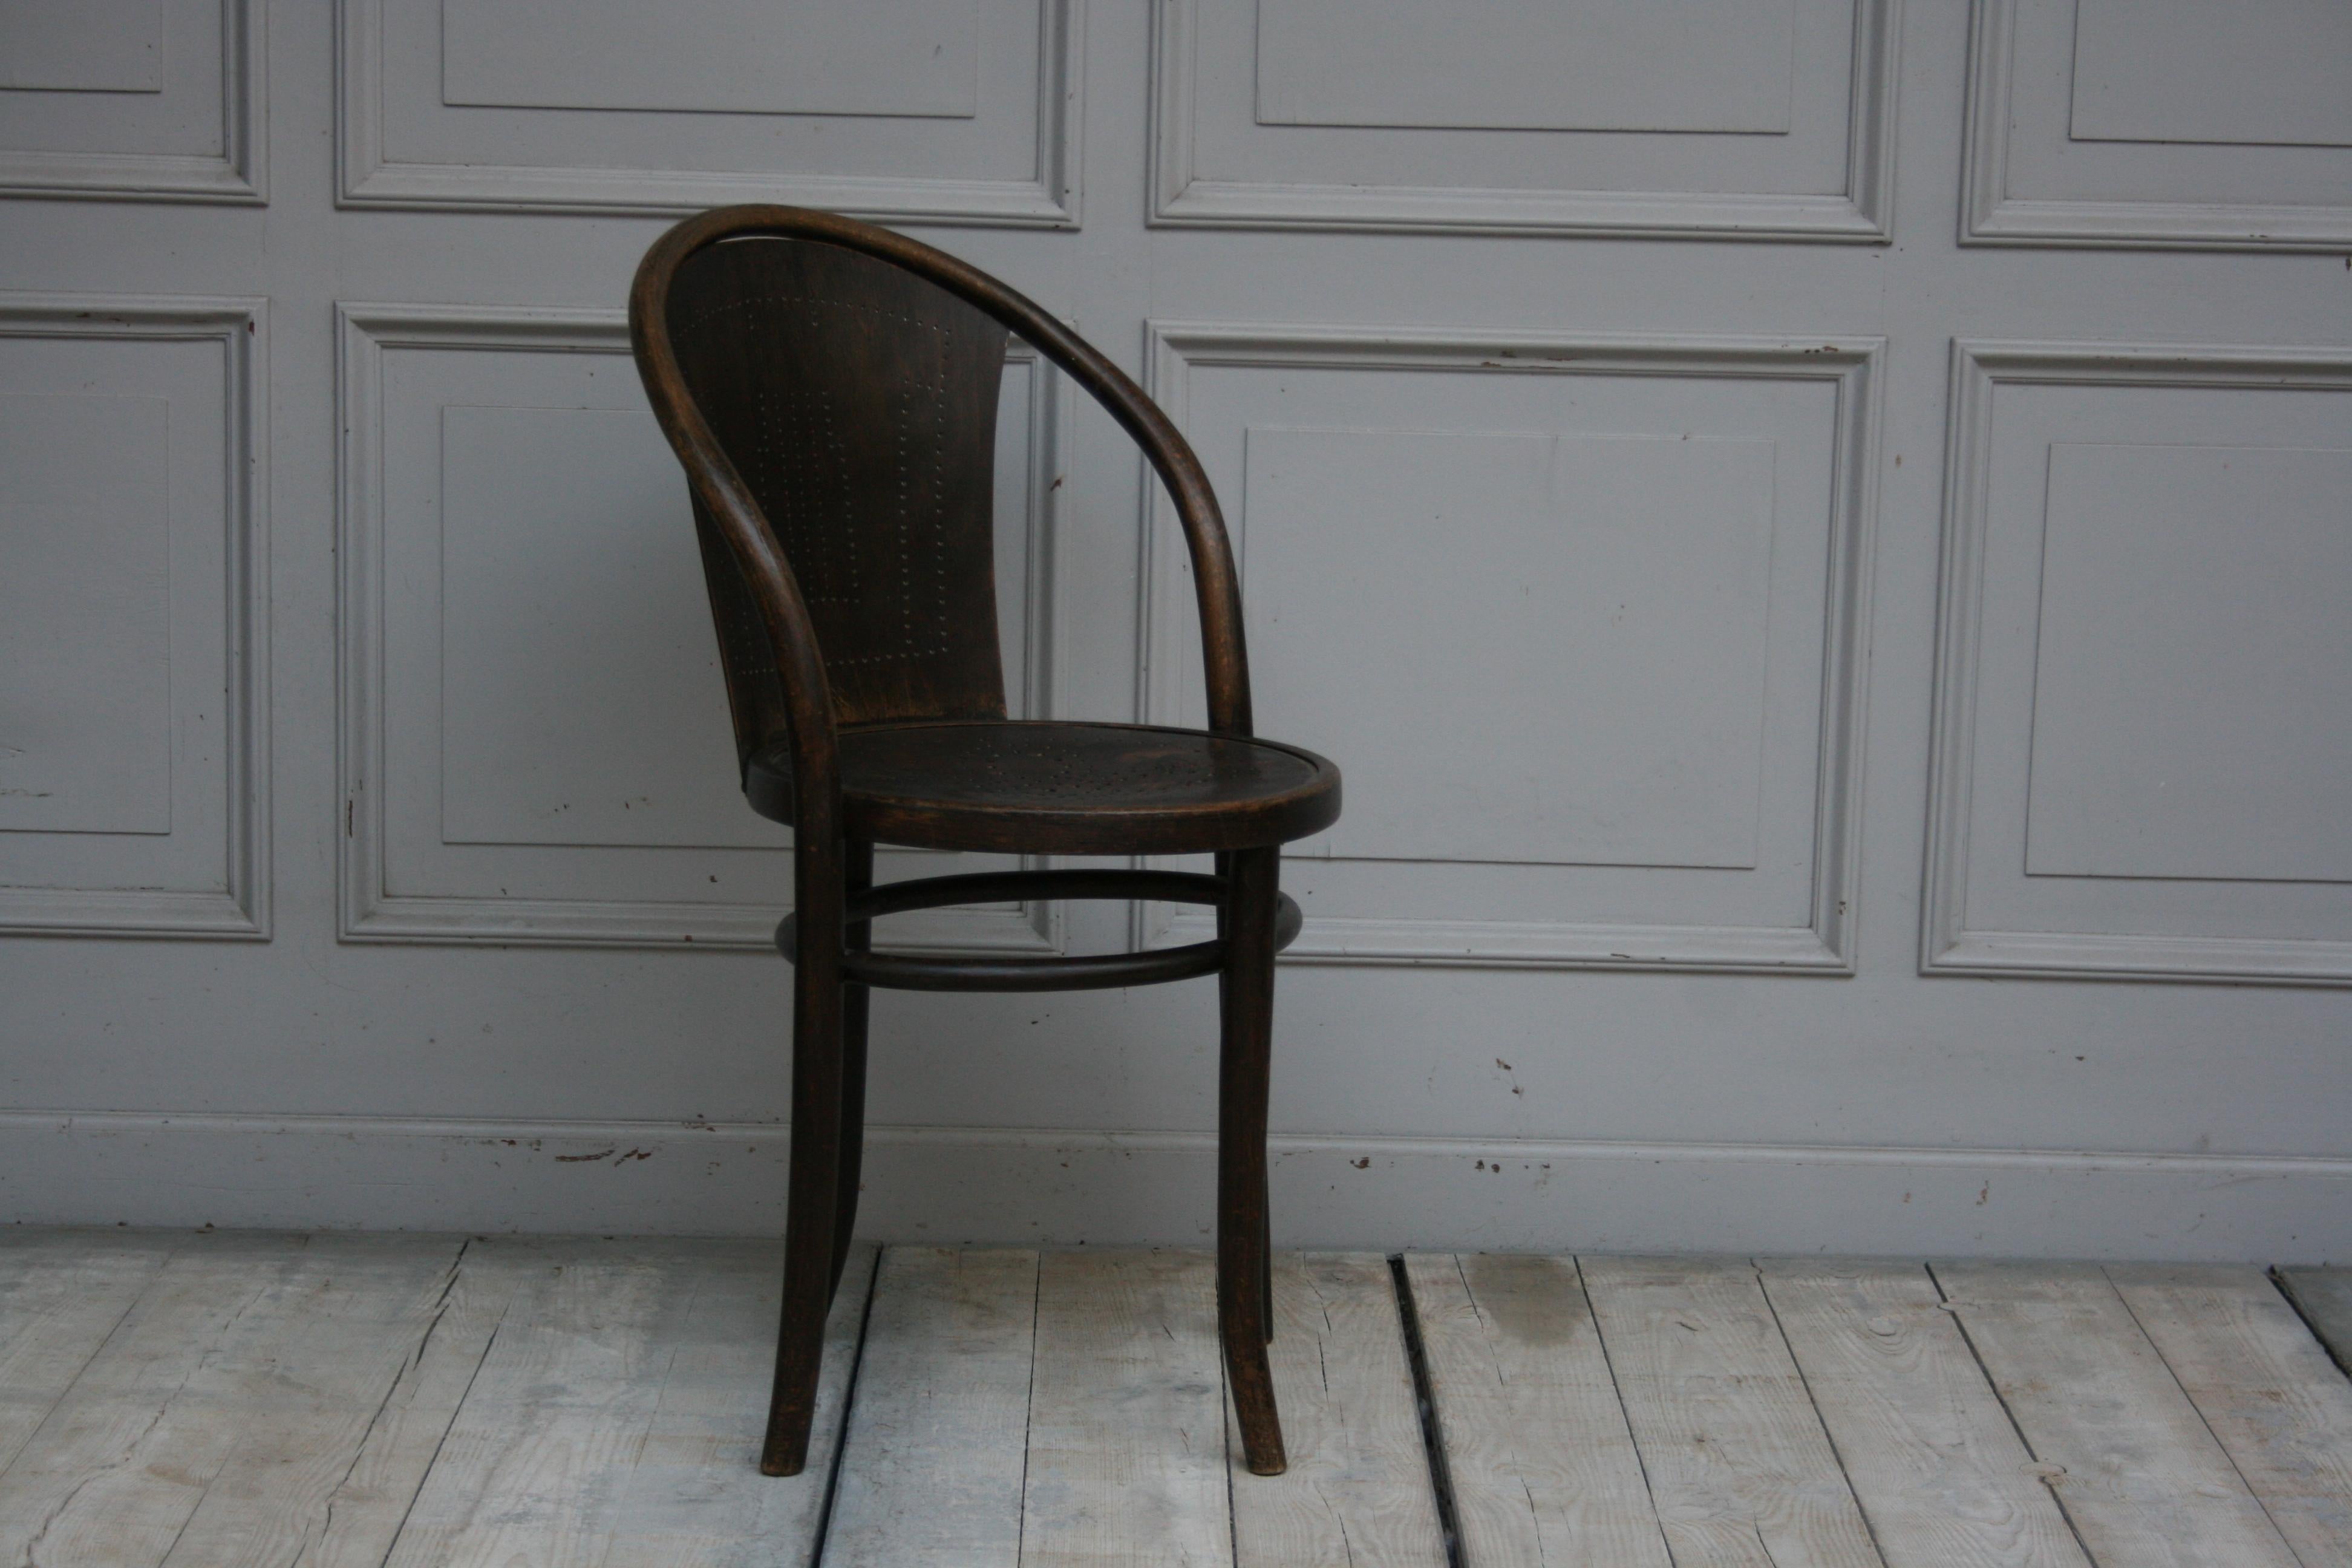 Rare very early model 47 chair from Thonet with a bent beechwood frame and beautiful perforated seat detailing, circa 1911. Design by Michael Thonet. 

Dimensions: Seat height 46.5 cm; Diameter about 46 cm; Height 83 cm.